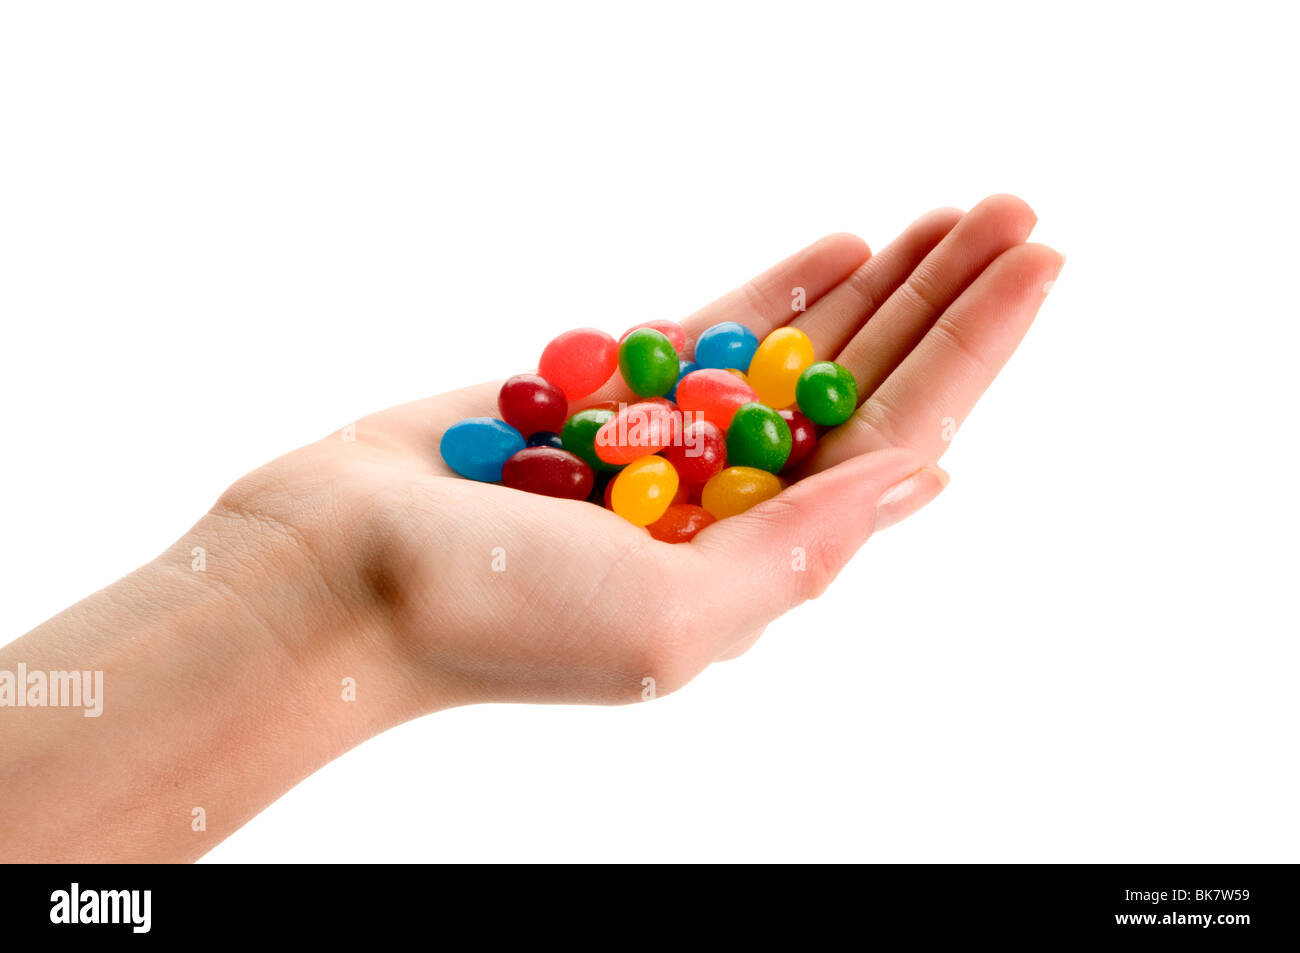 hand holding jelly beans Stock Photo